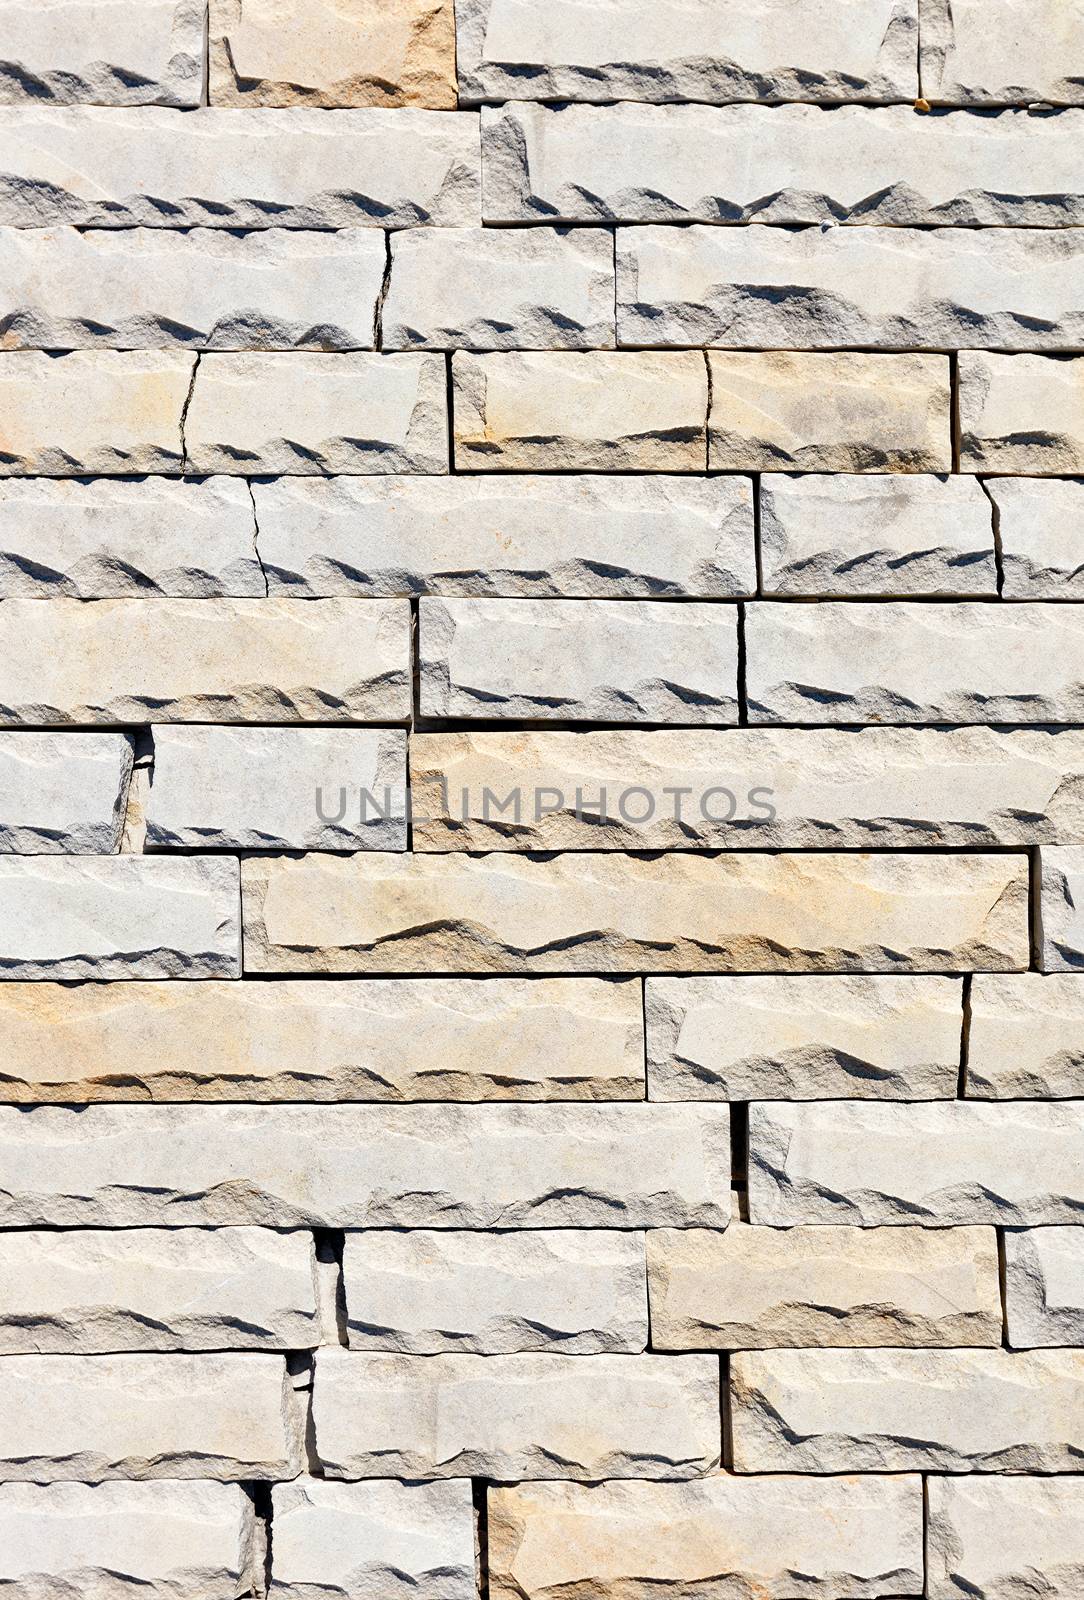 Surface of gray and yellow sandstone tiles, each chipped along the perimeter, with cracks. by Sergii